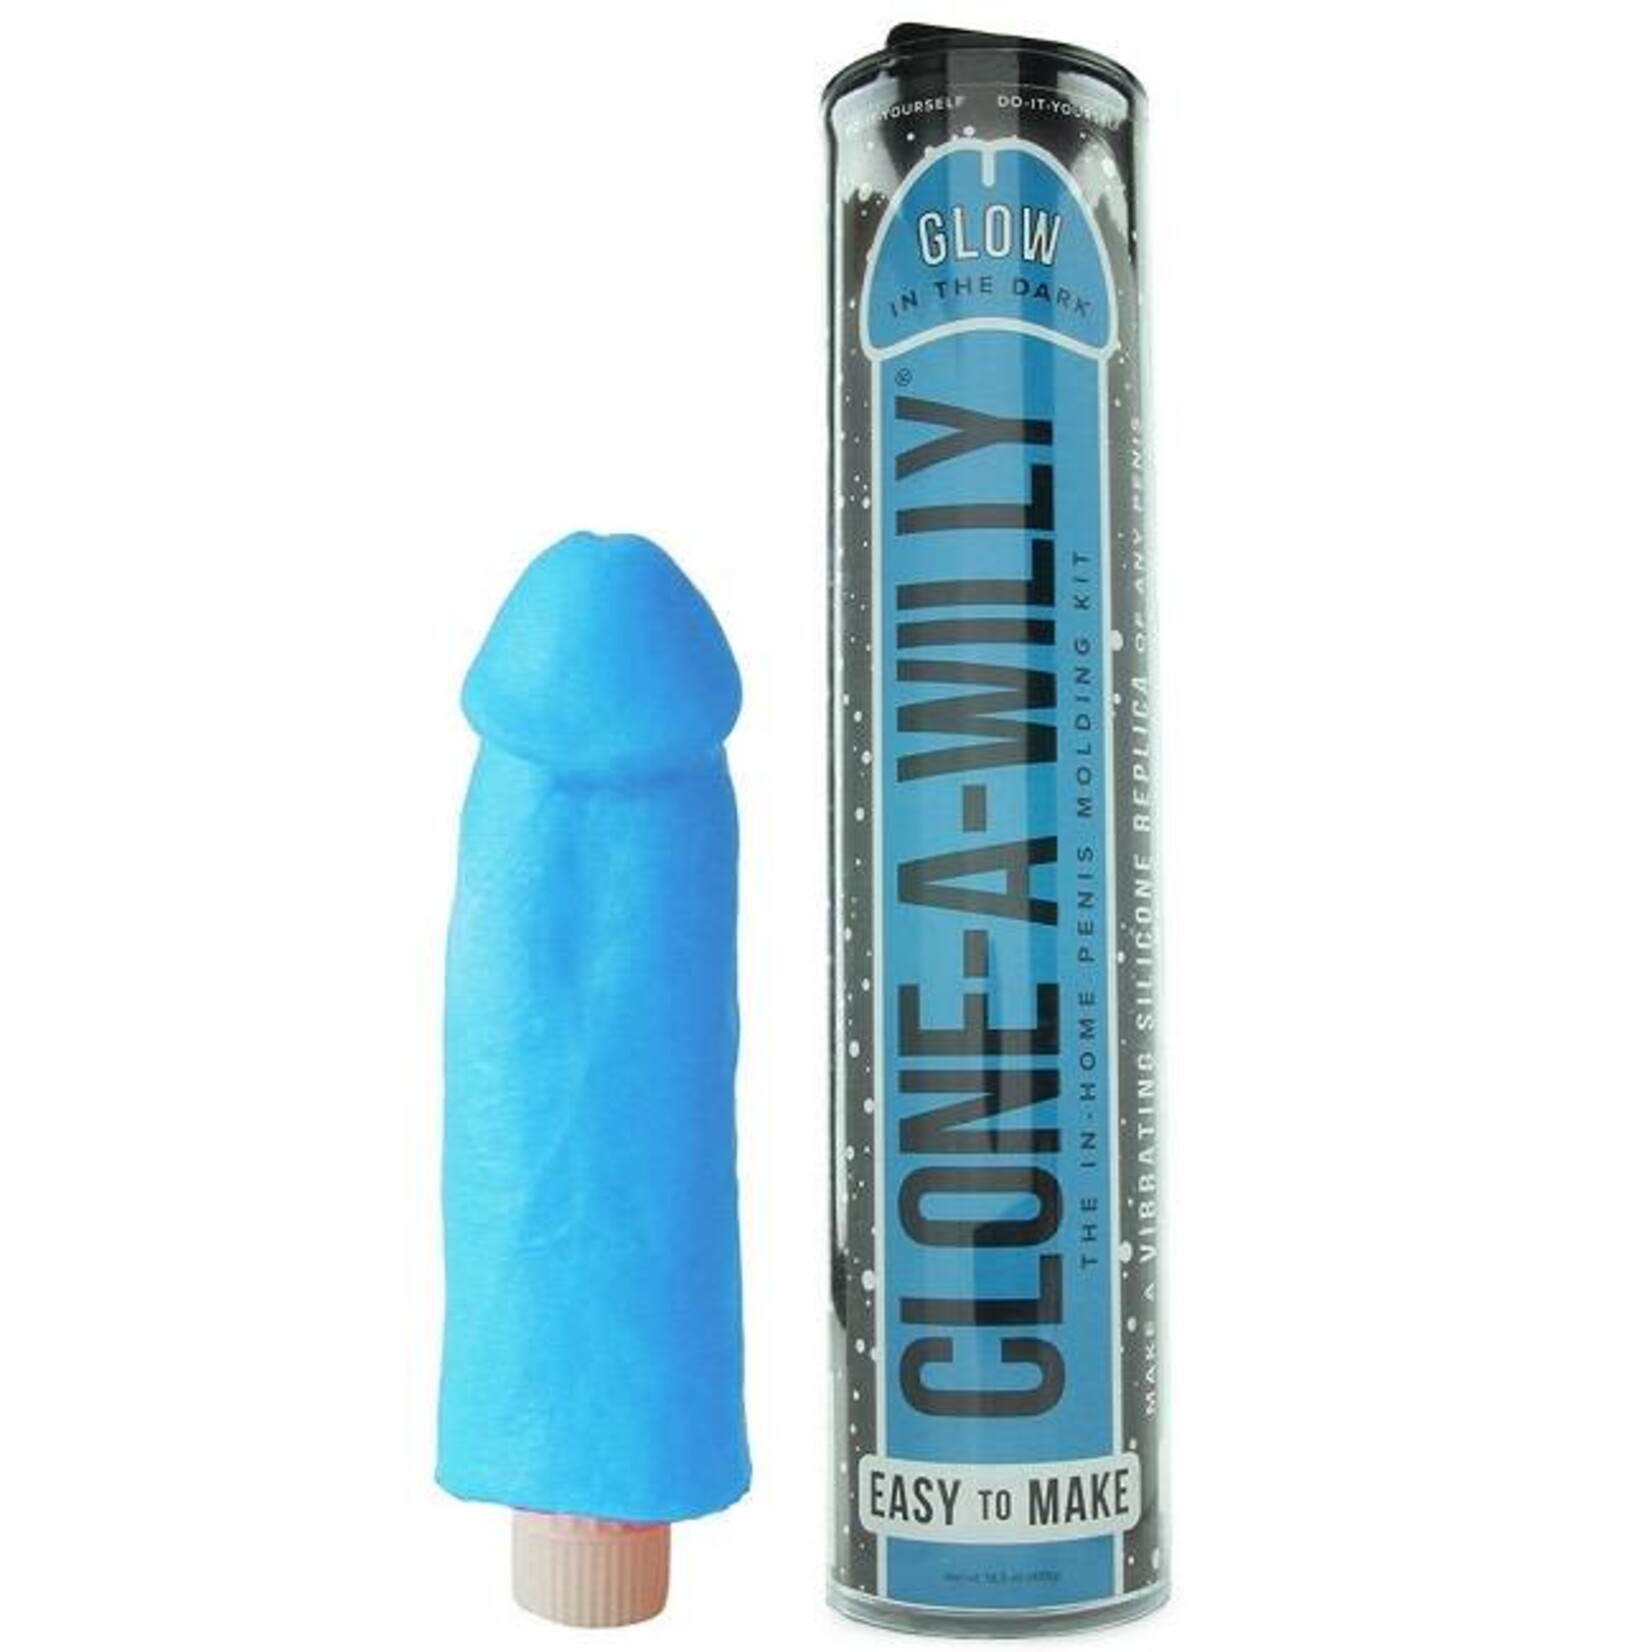 Clone-A-Willy Clone-A-Willy Vibrator Kit - Glow-in-the-Dark Blue